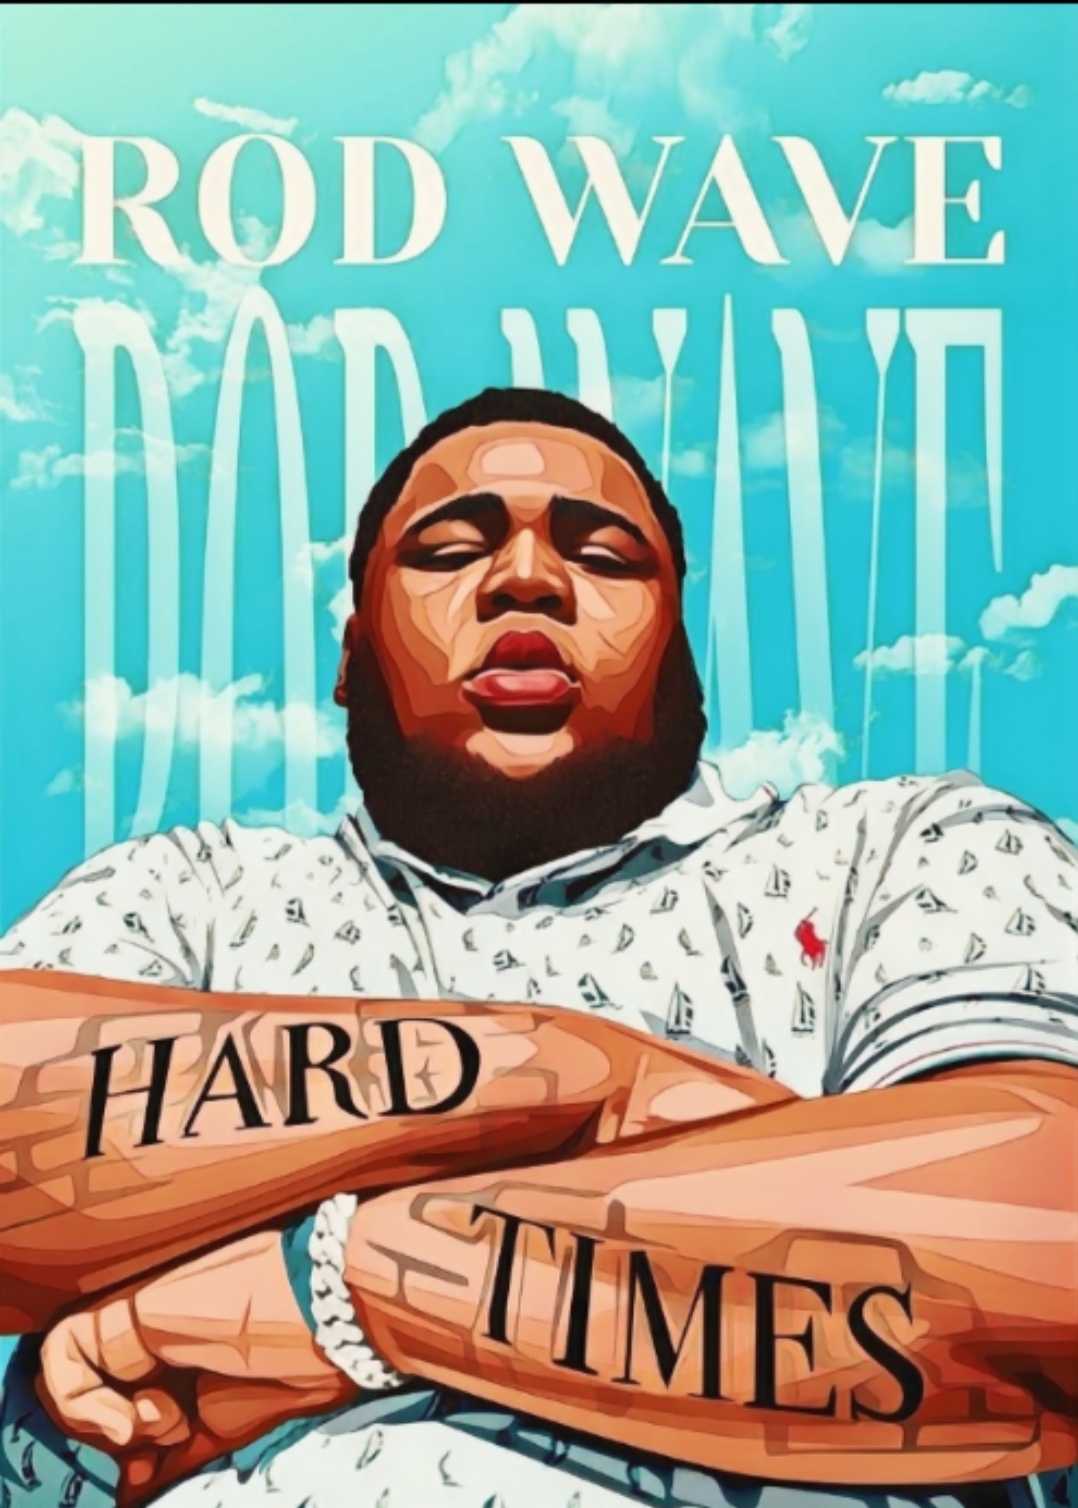 Rod Wave Hard Times wallpaper I made for my phone - Rod Wave